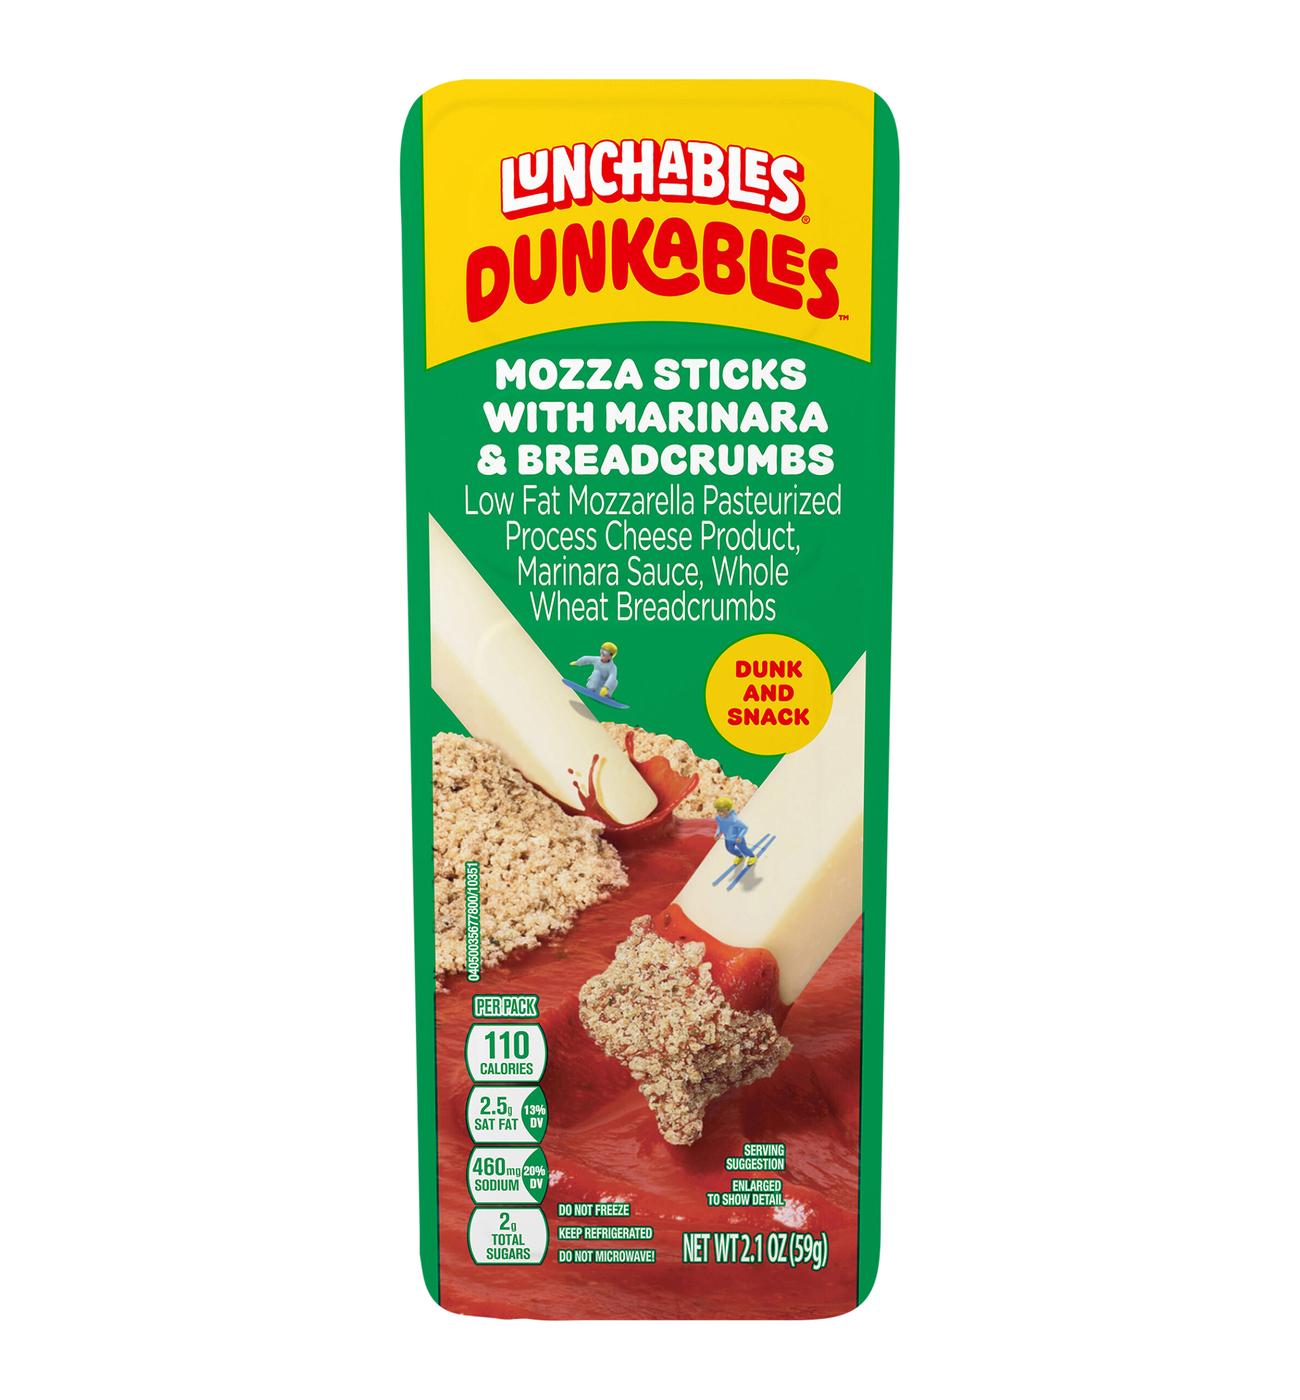 Lunchables Dunkables Snack Kit Tray - Mozza Sticks with Marinara & Breadcrumbs; image 1 of 8